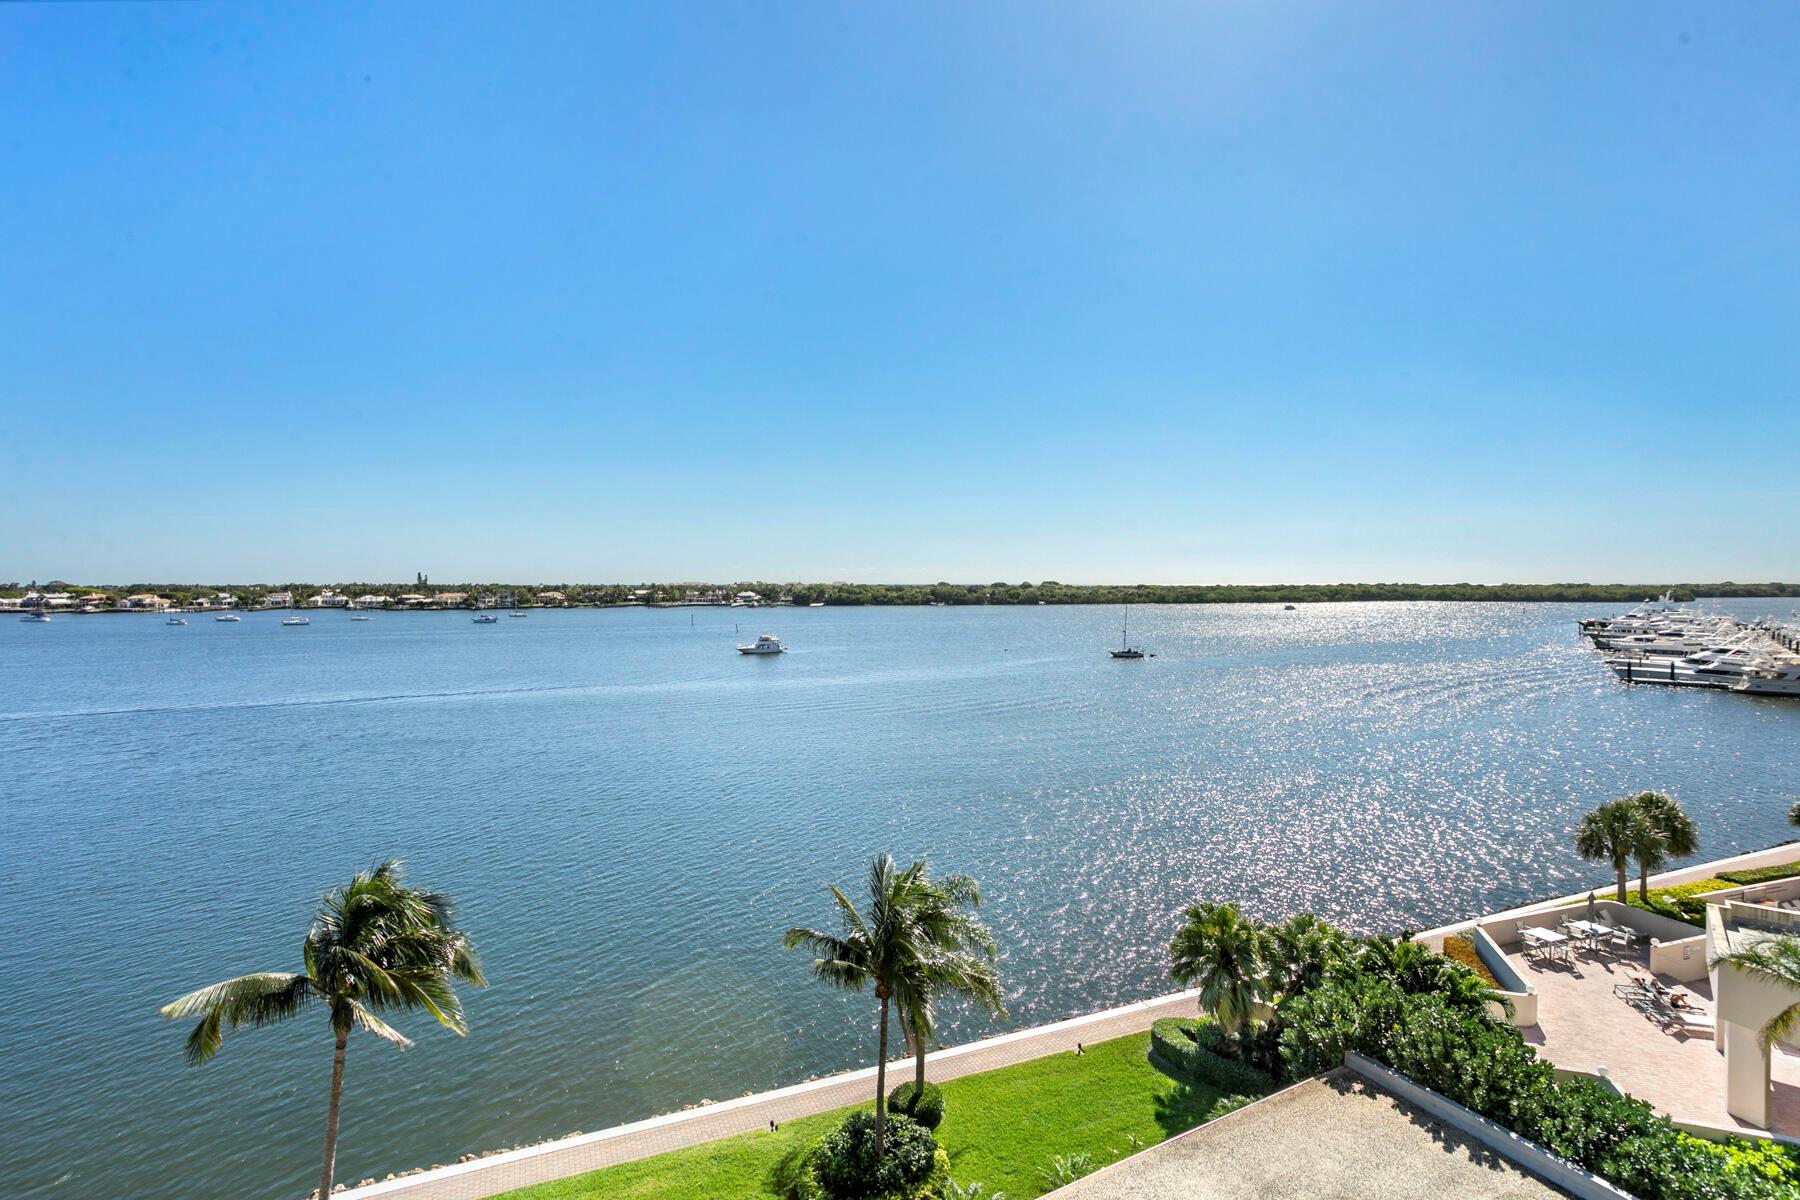 Enjoy spectacular ocean and intracoastal views form this beautifully renovated 7th floor condo in Old Port Cove. Old Port Cove is a gated community is situated on the intracoastal and offers a fitness center, a heated outdoor pool & sauna, restaurant and full service marina.. The condo is conveniently located within walking distance to restaurants, golf and shopping.